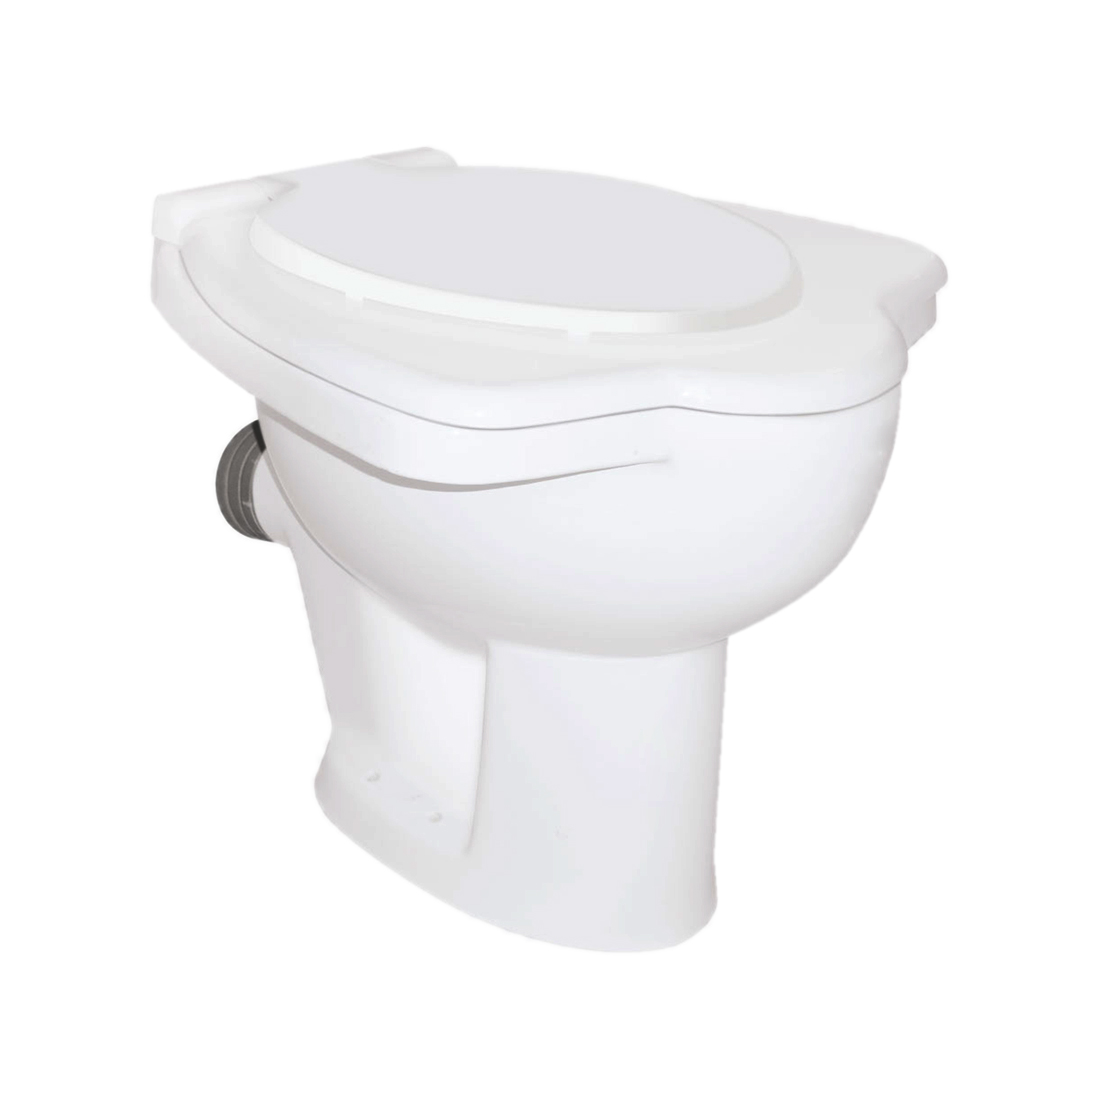 Kerovit Pluto KS122 Anglo Indian Water Closet With Seat Cover